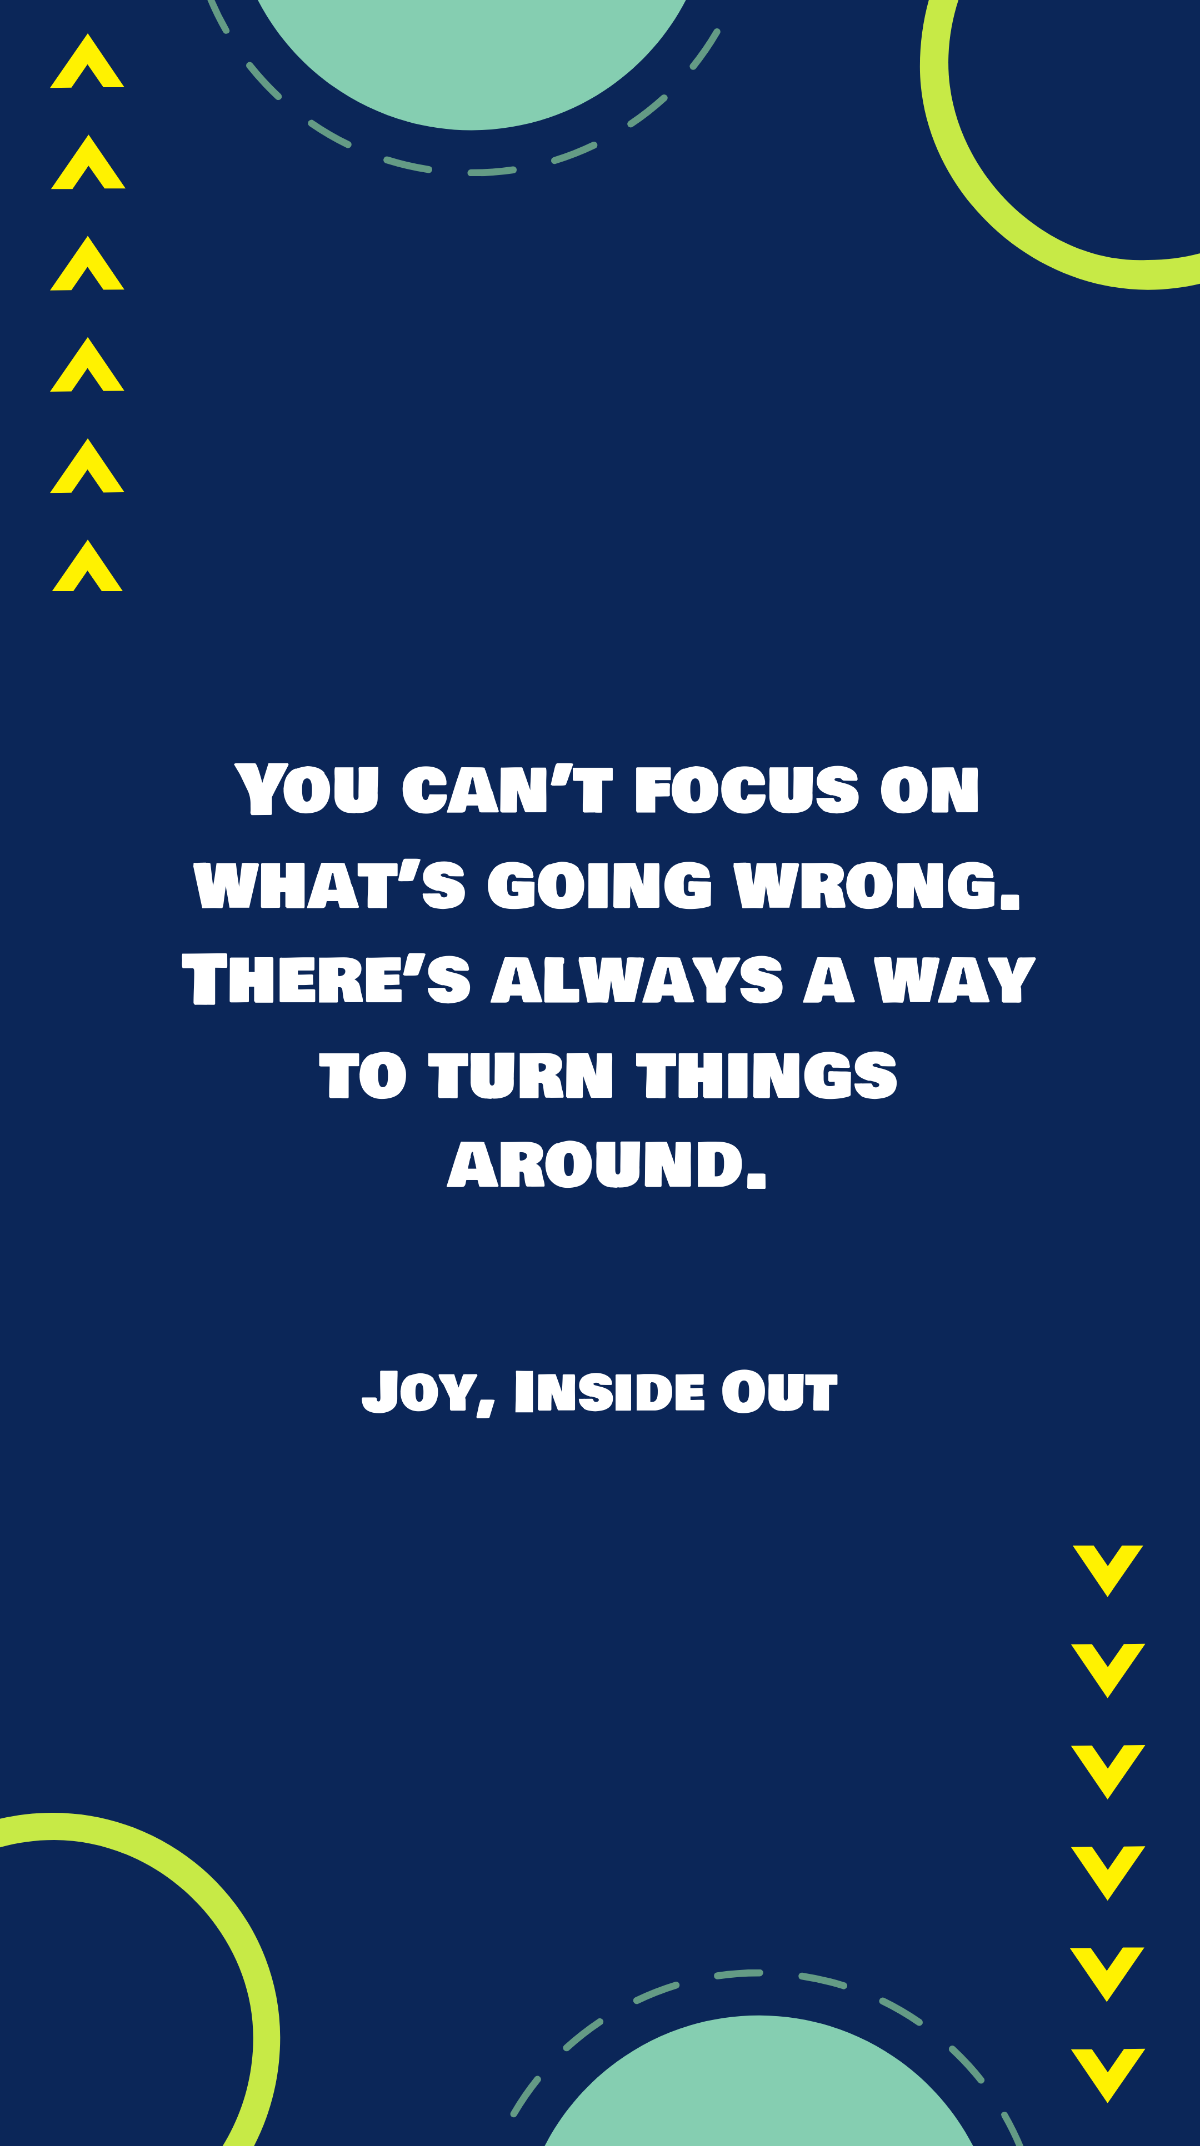 Joy, Inside Out - “You can’t focus on what’s going wrong. There’s always a way to turn things around.” Template